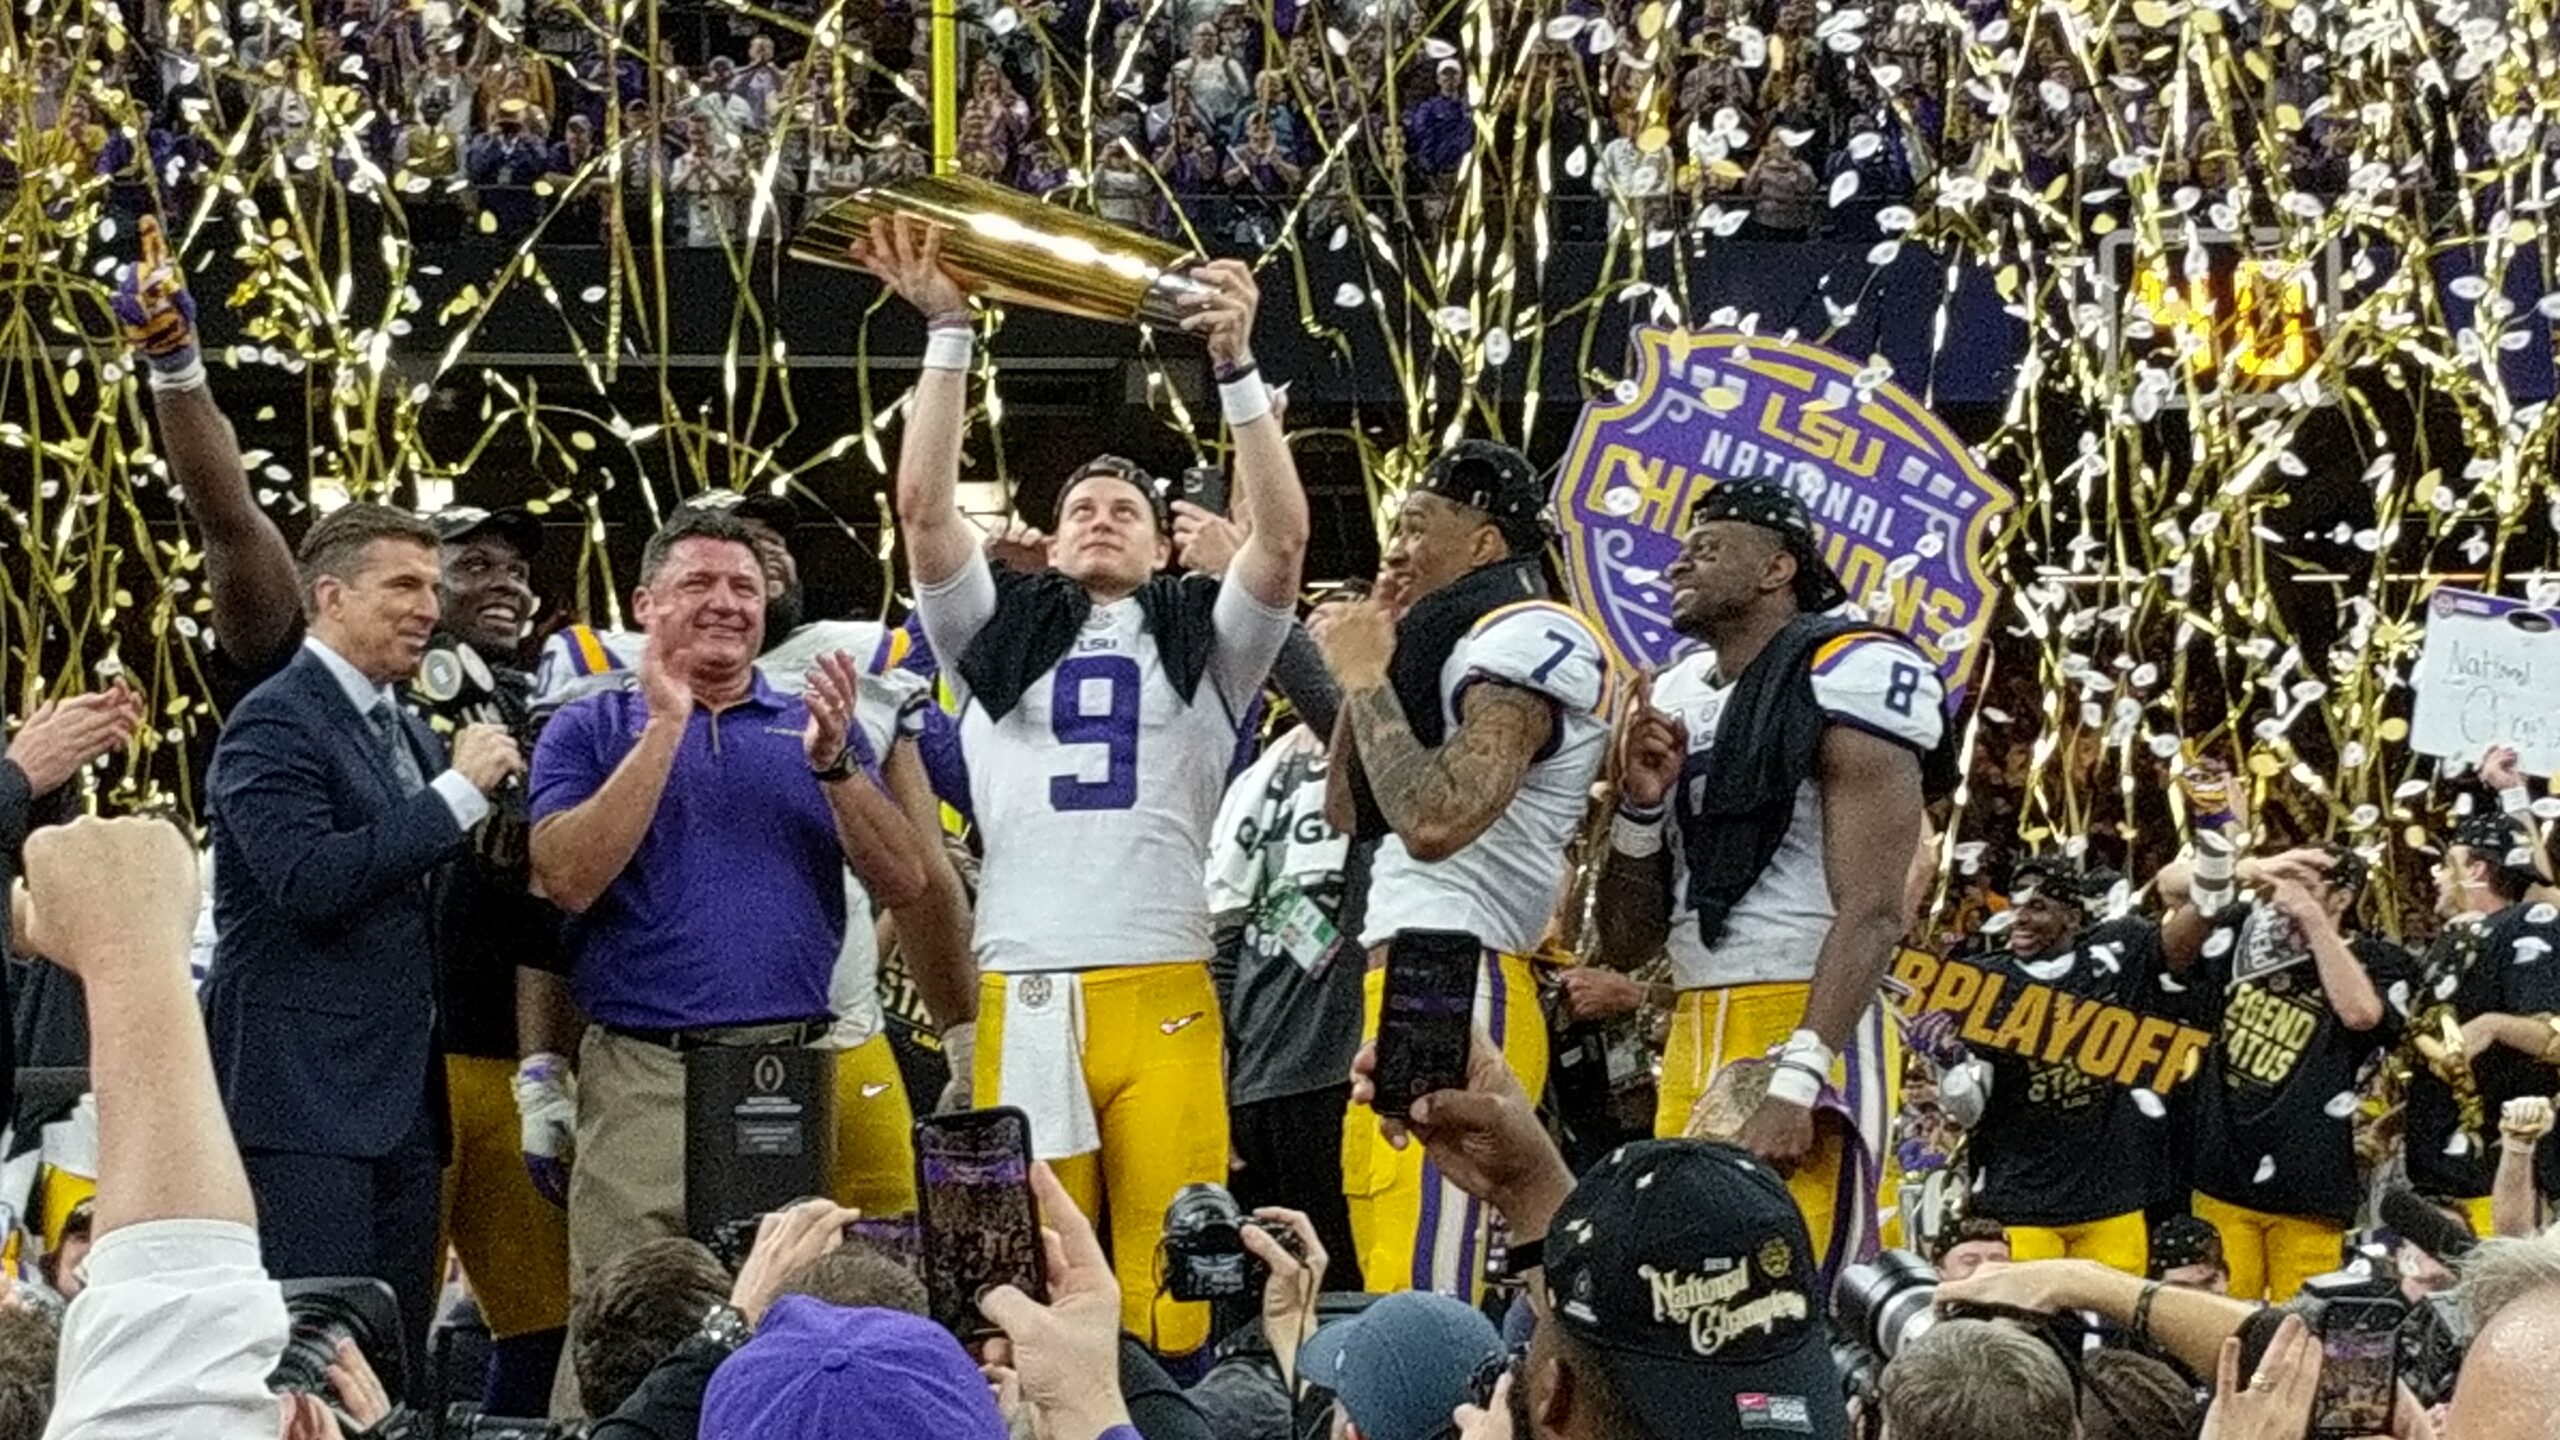 LSU 15-0 ALL HAIL THE KING